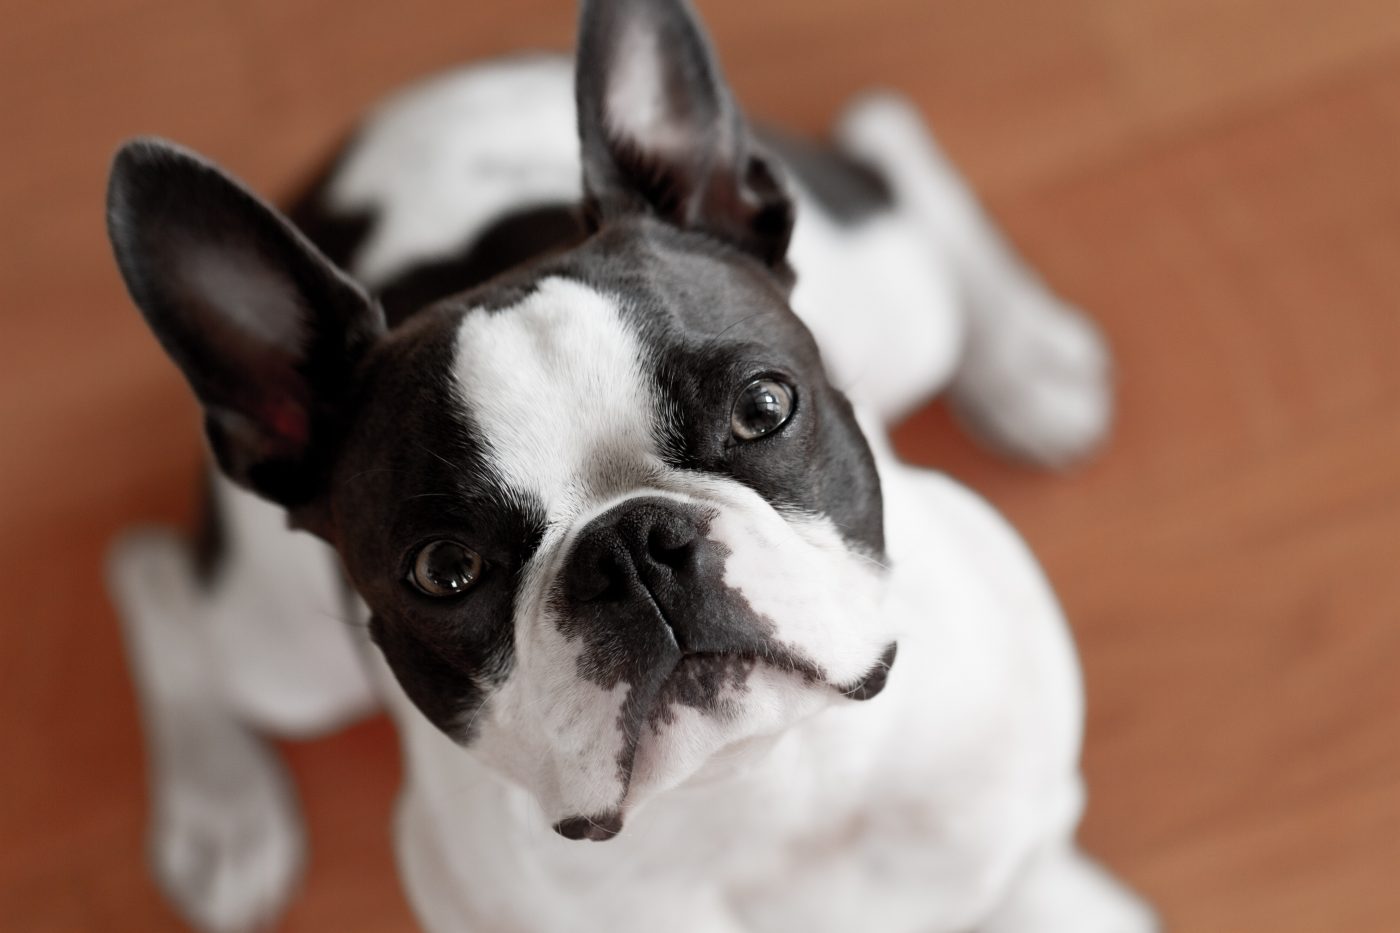 Boston Terrier Temperament: What's a Boston Terrier's Personality Like?